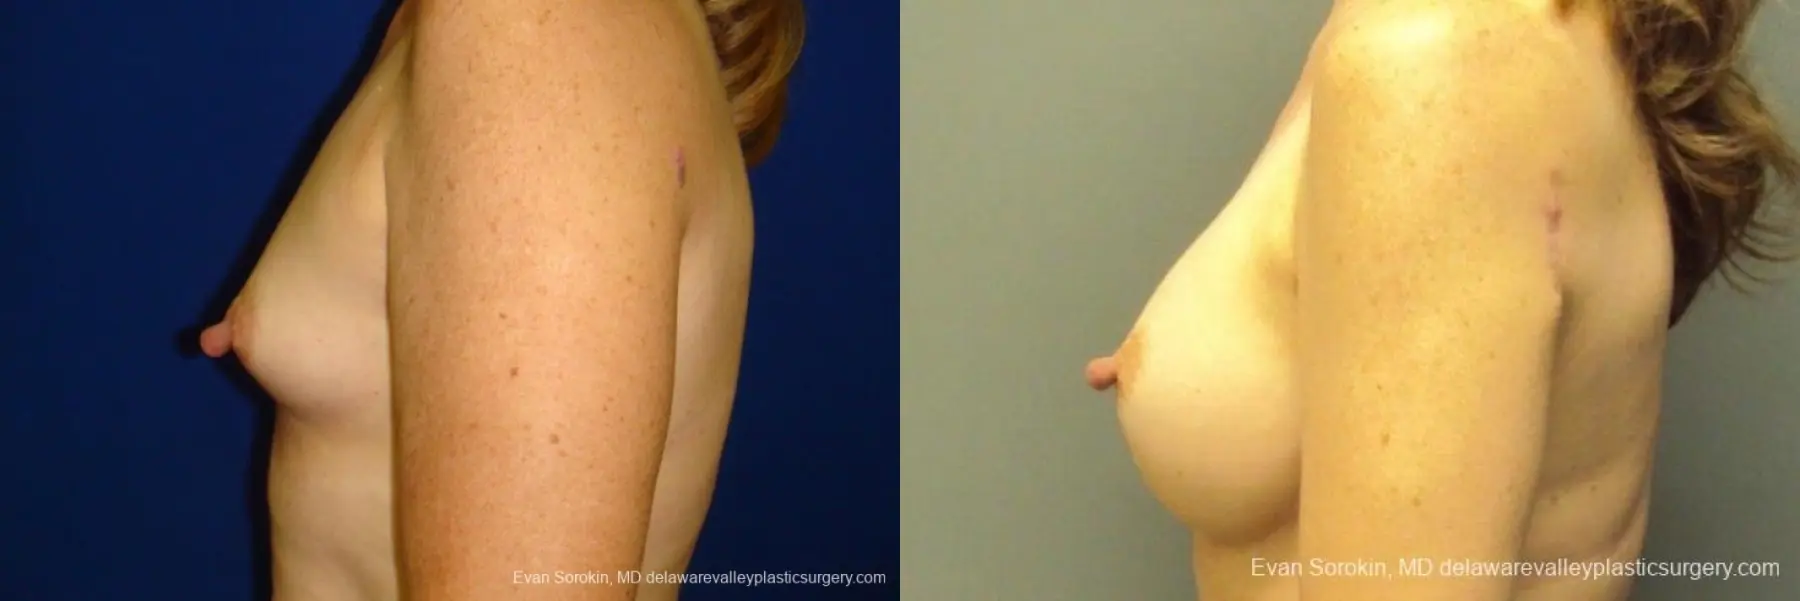 Philadelphia Breast Augmentation 8765 - Before and After 5